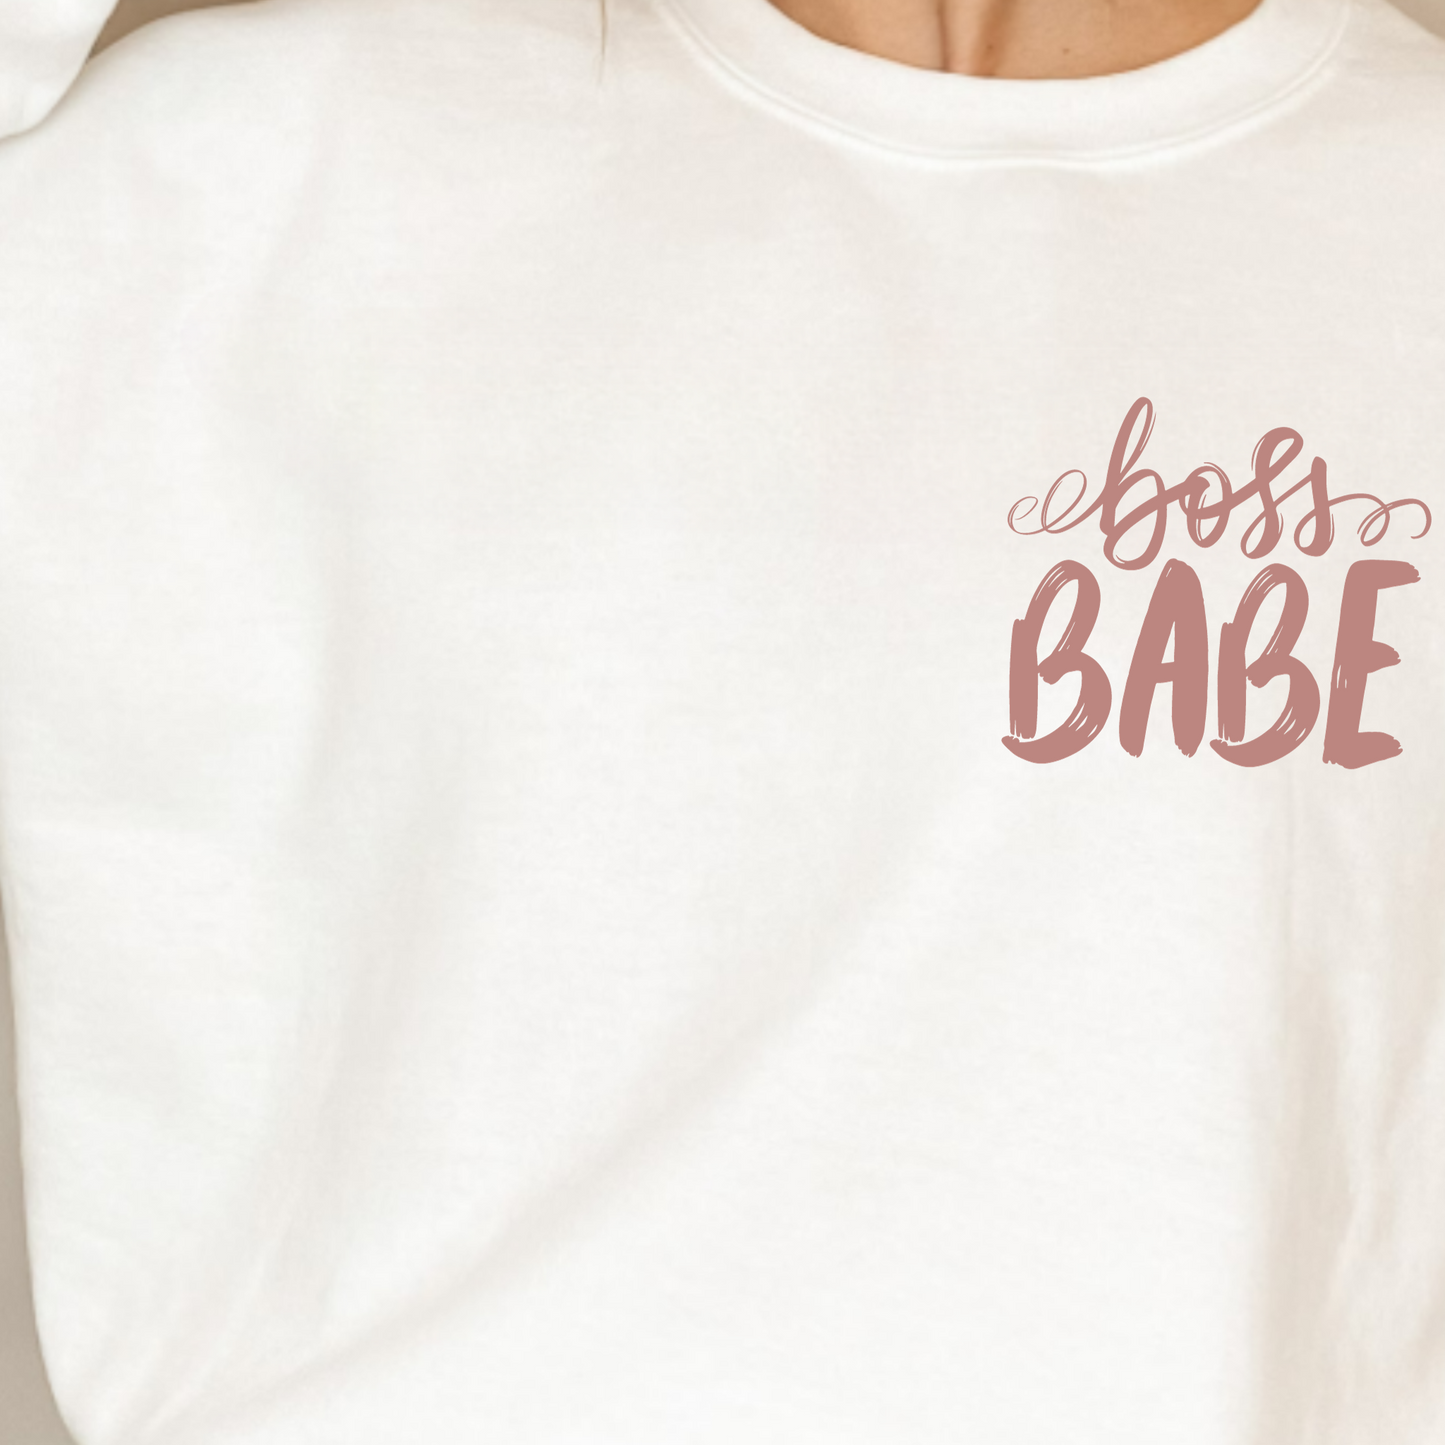 (Shirt not included) Boss Babe POCKET - Clear Film Transfer